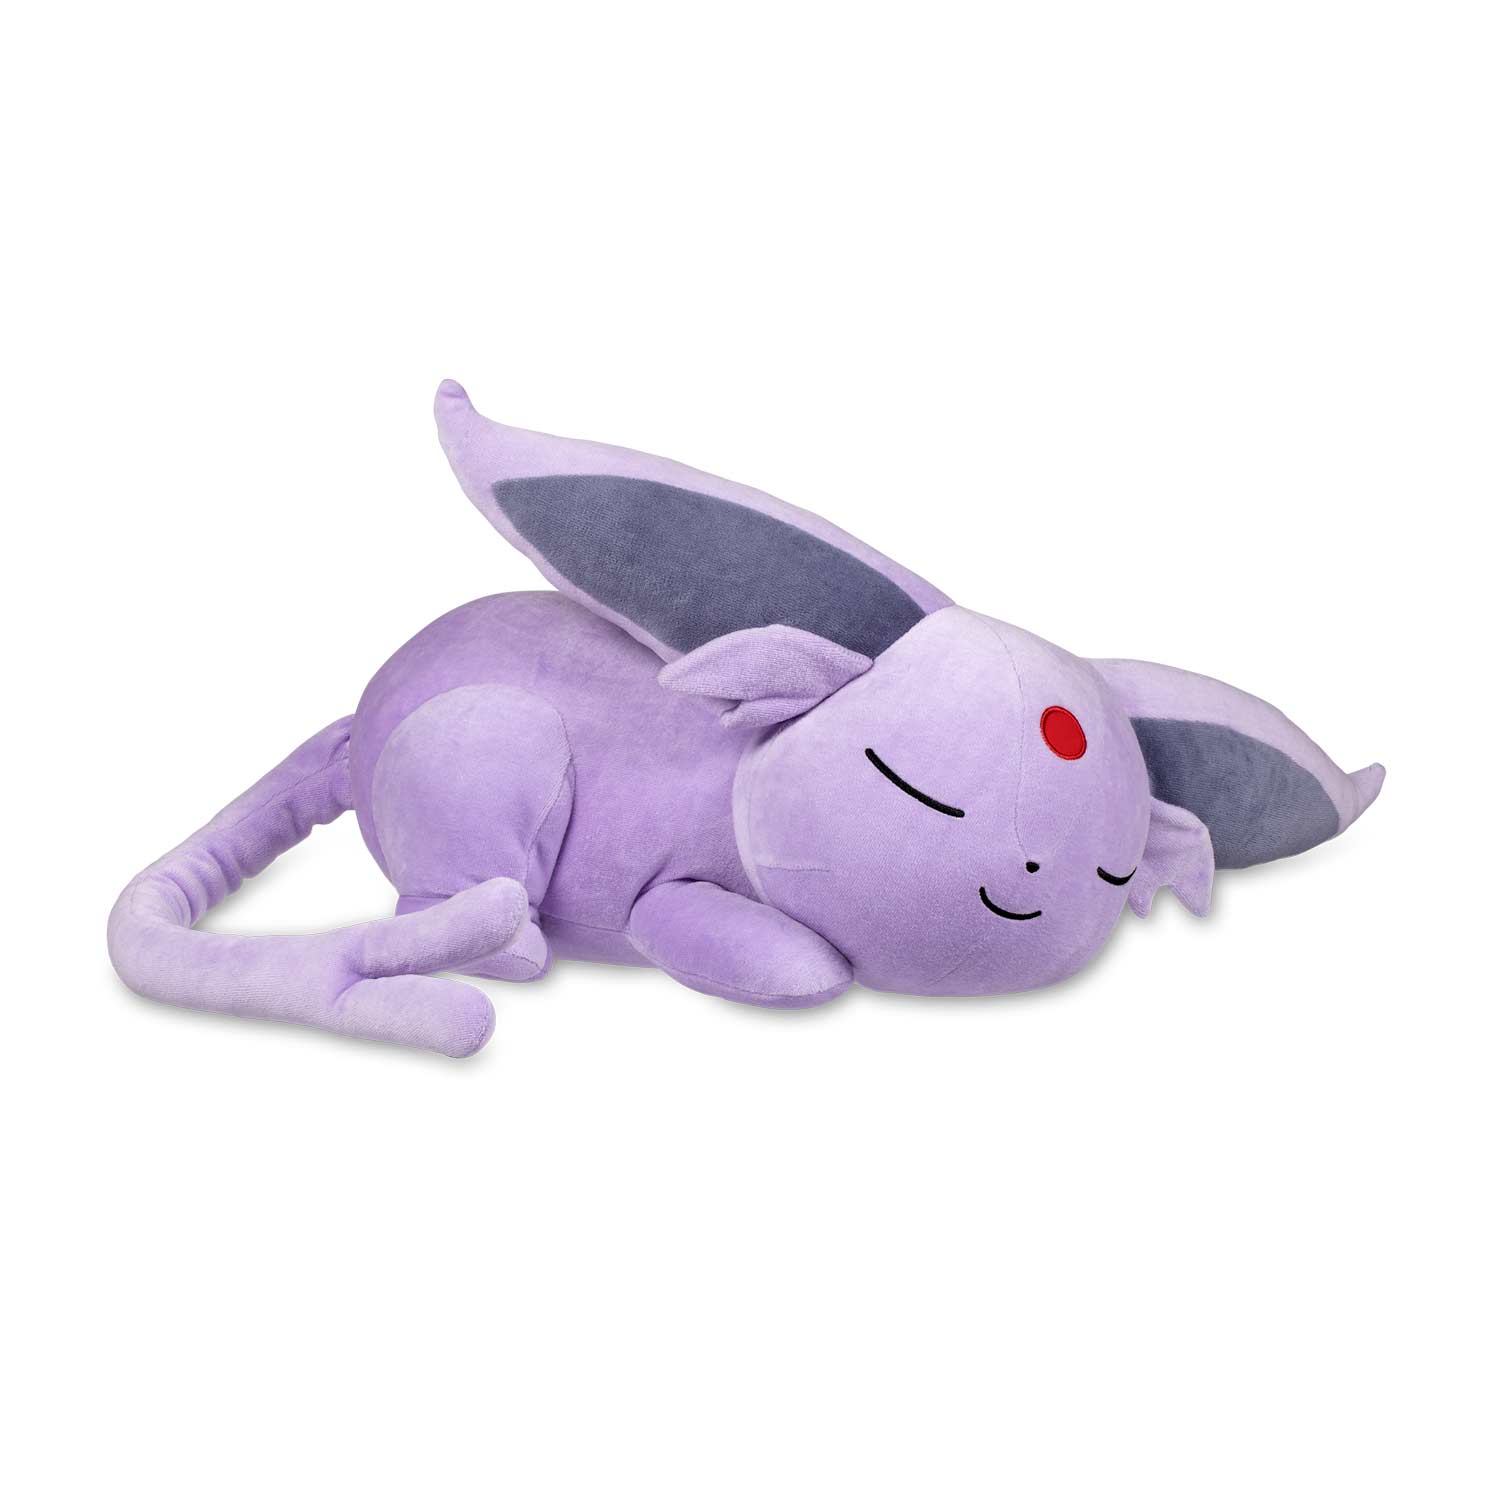 What Pokémon would you keep a plush of on your desk?